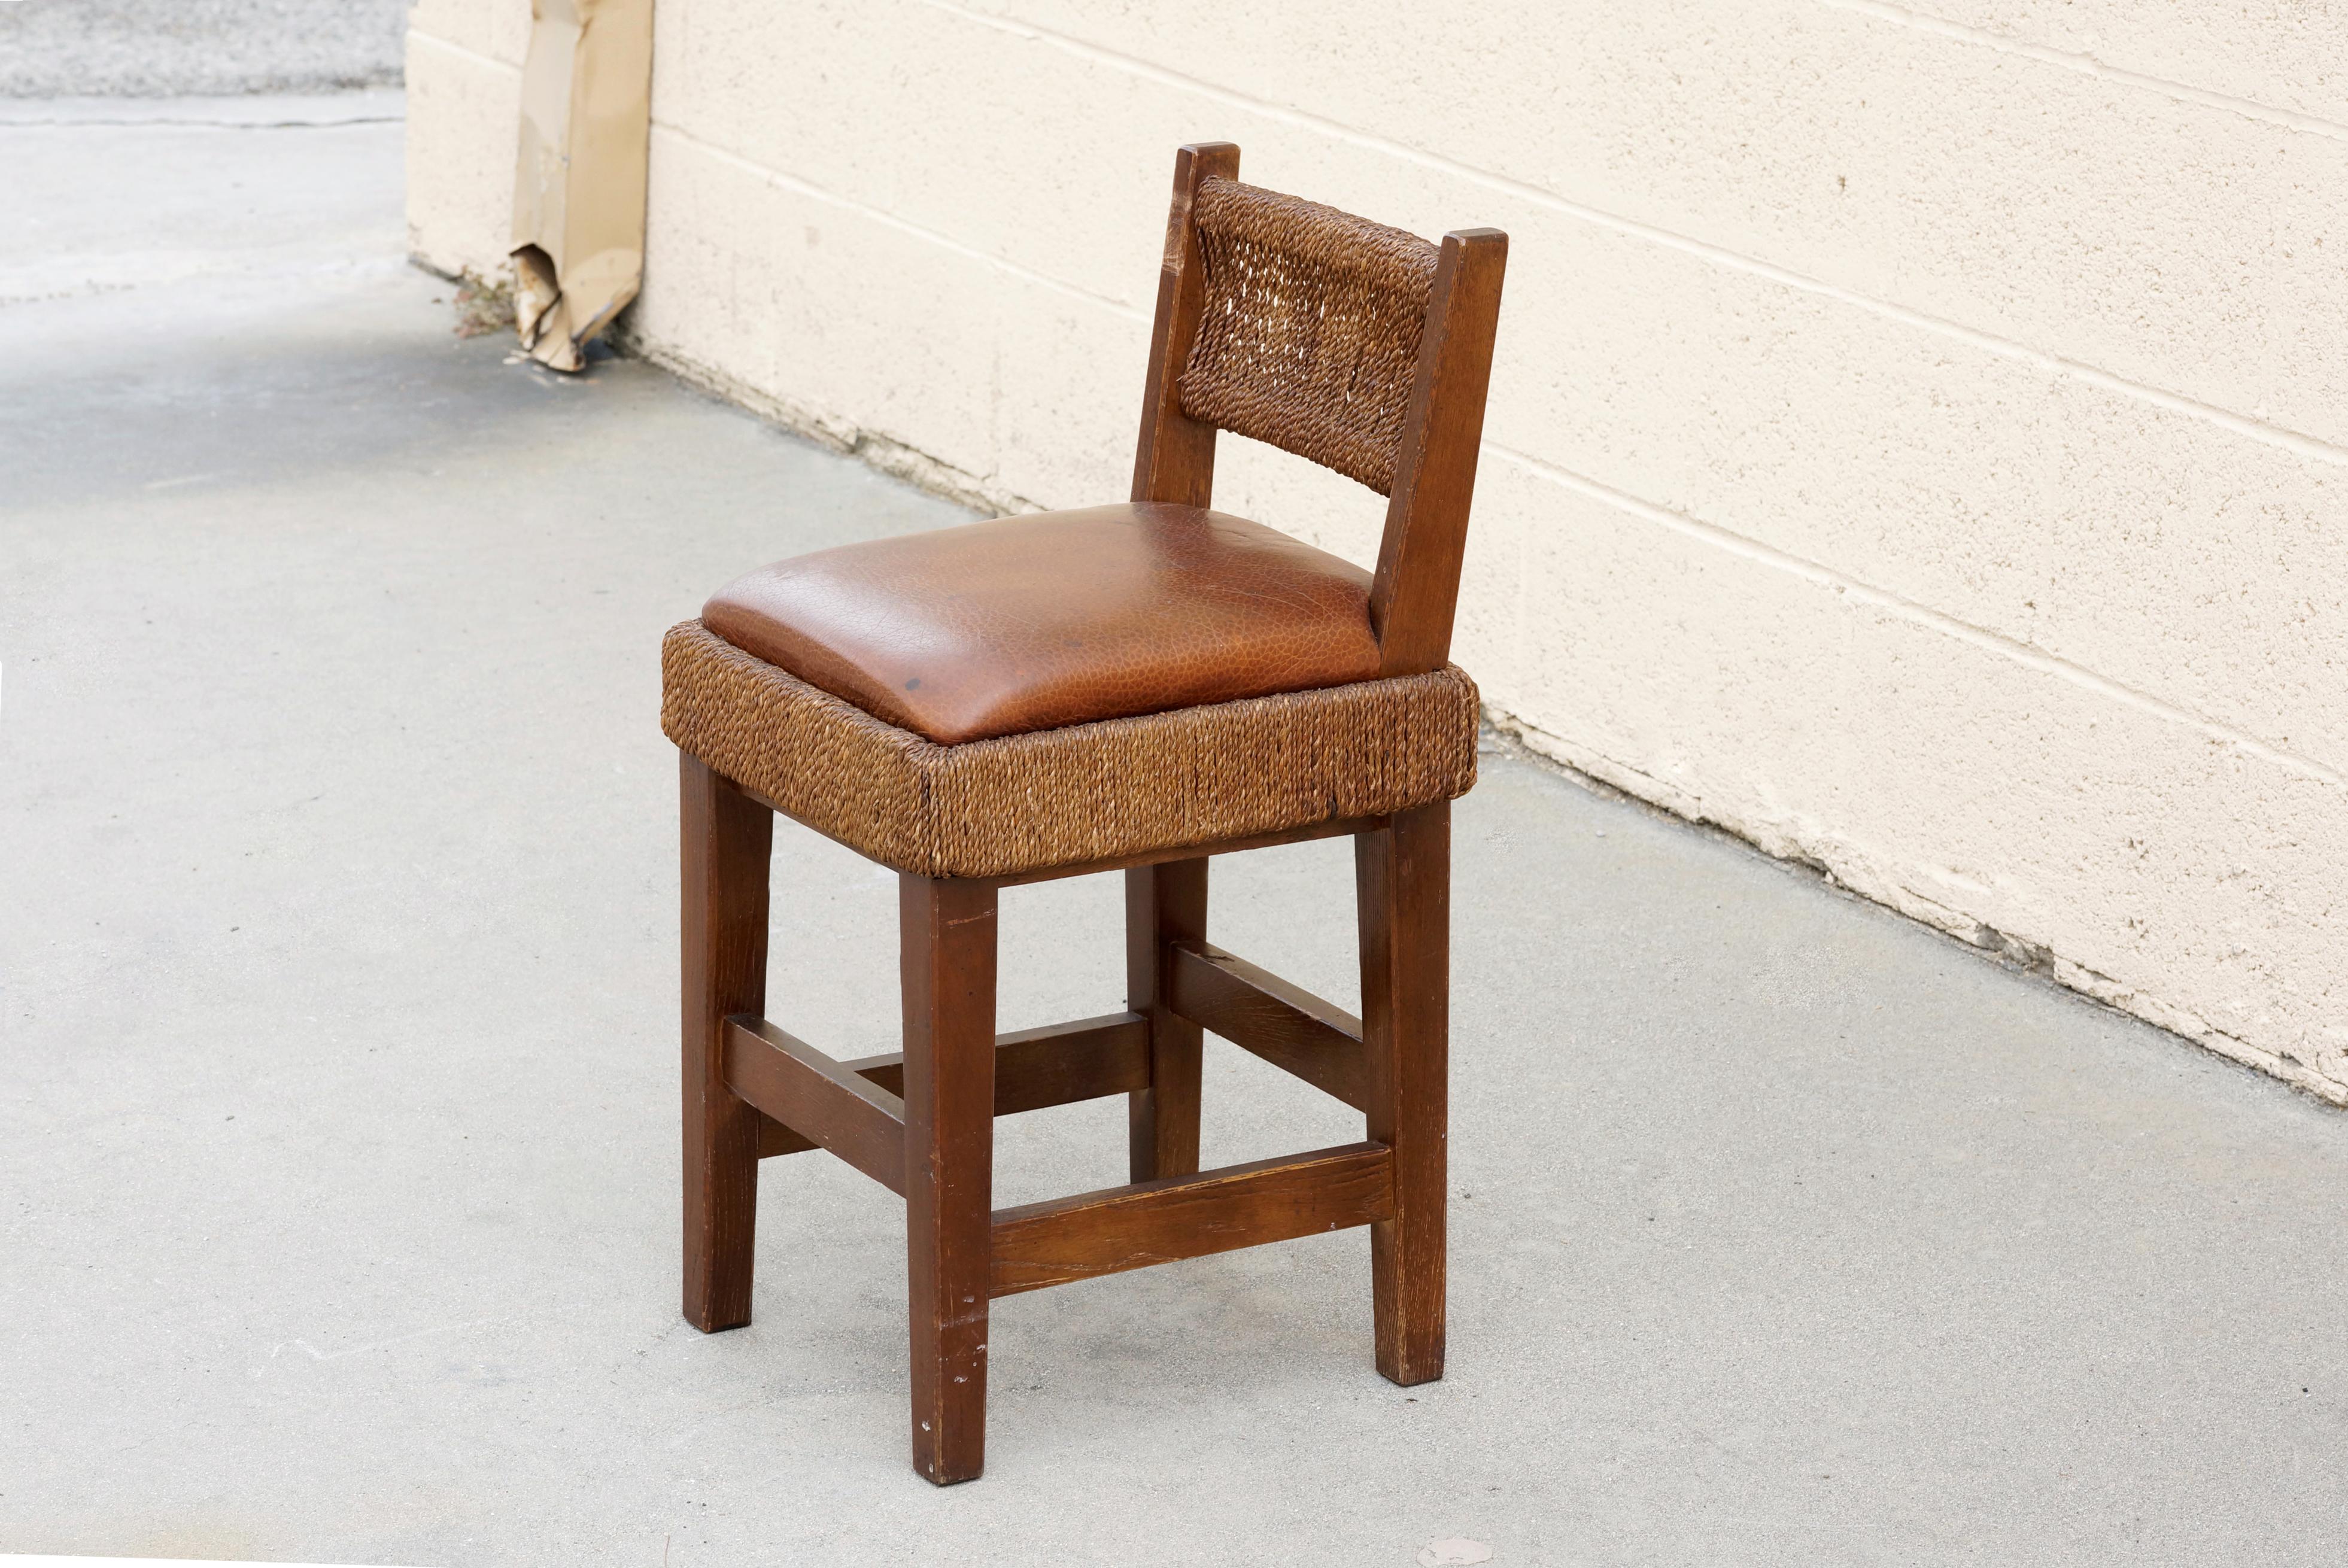 Woven Antique Art & Crafts Movement Childs Chair For Sale